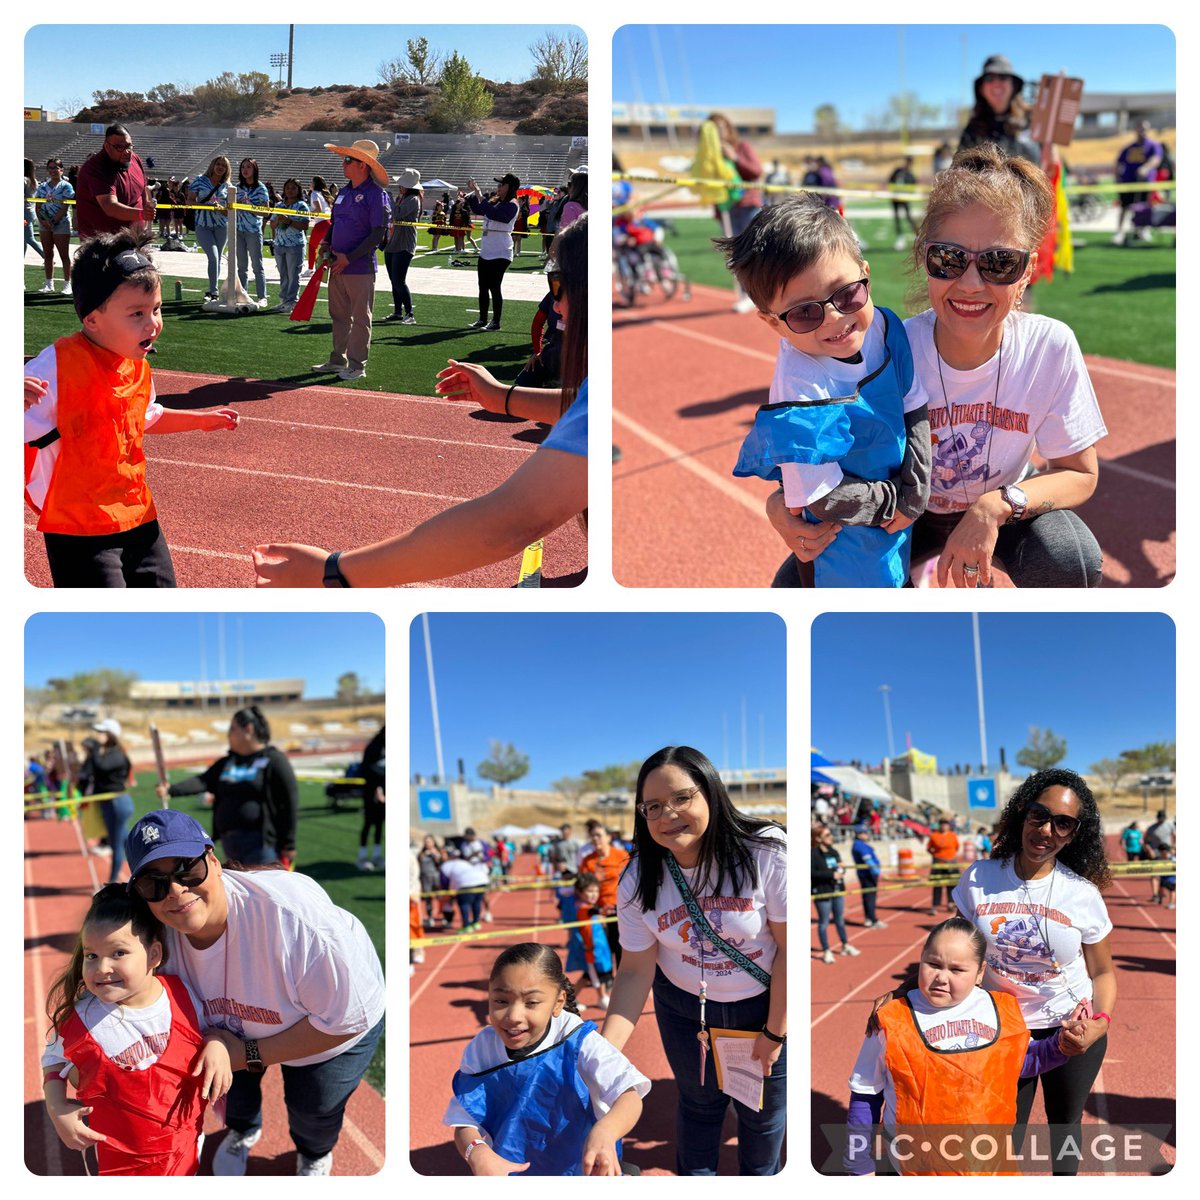 Kudos to #TeamSISD on yet another successful Spring Butler Games. Our Knights were all smiles today bringing their 🅰️ game. Loved every minute with our community & @SocorroISD family! Blessed to have the best team ever coming together to serve and support! #ItsAnItuarteThing